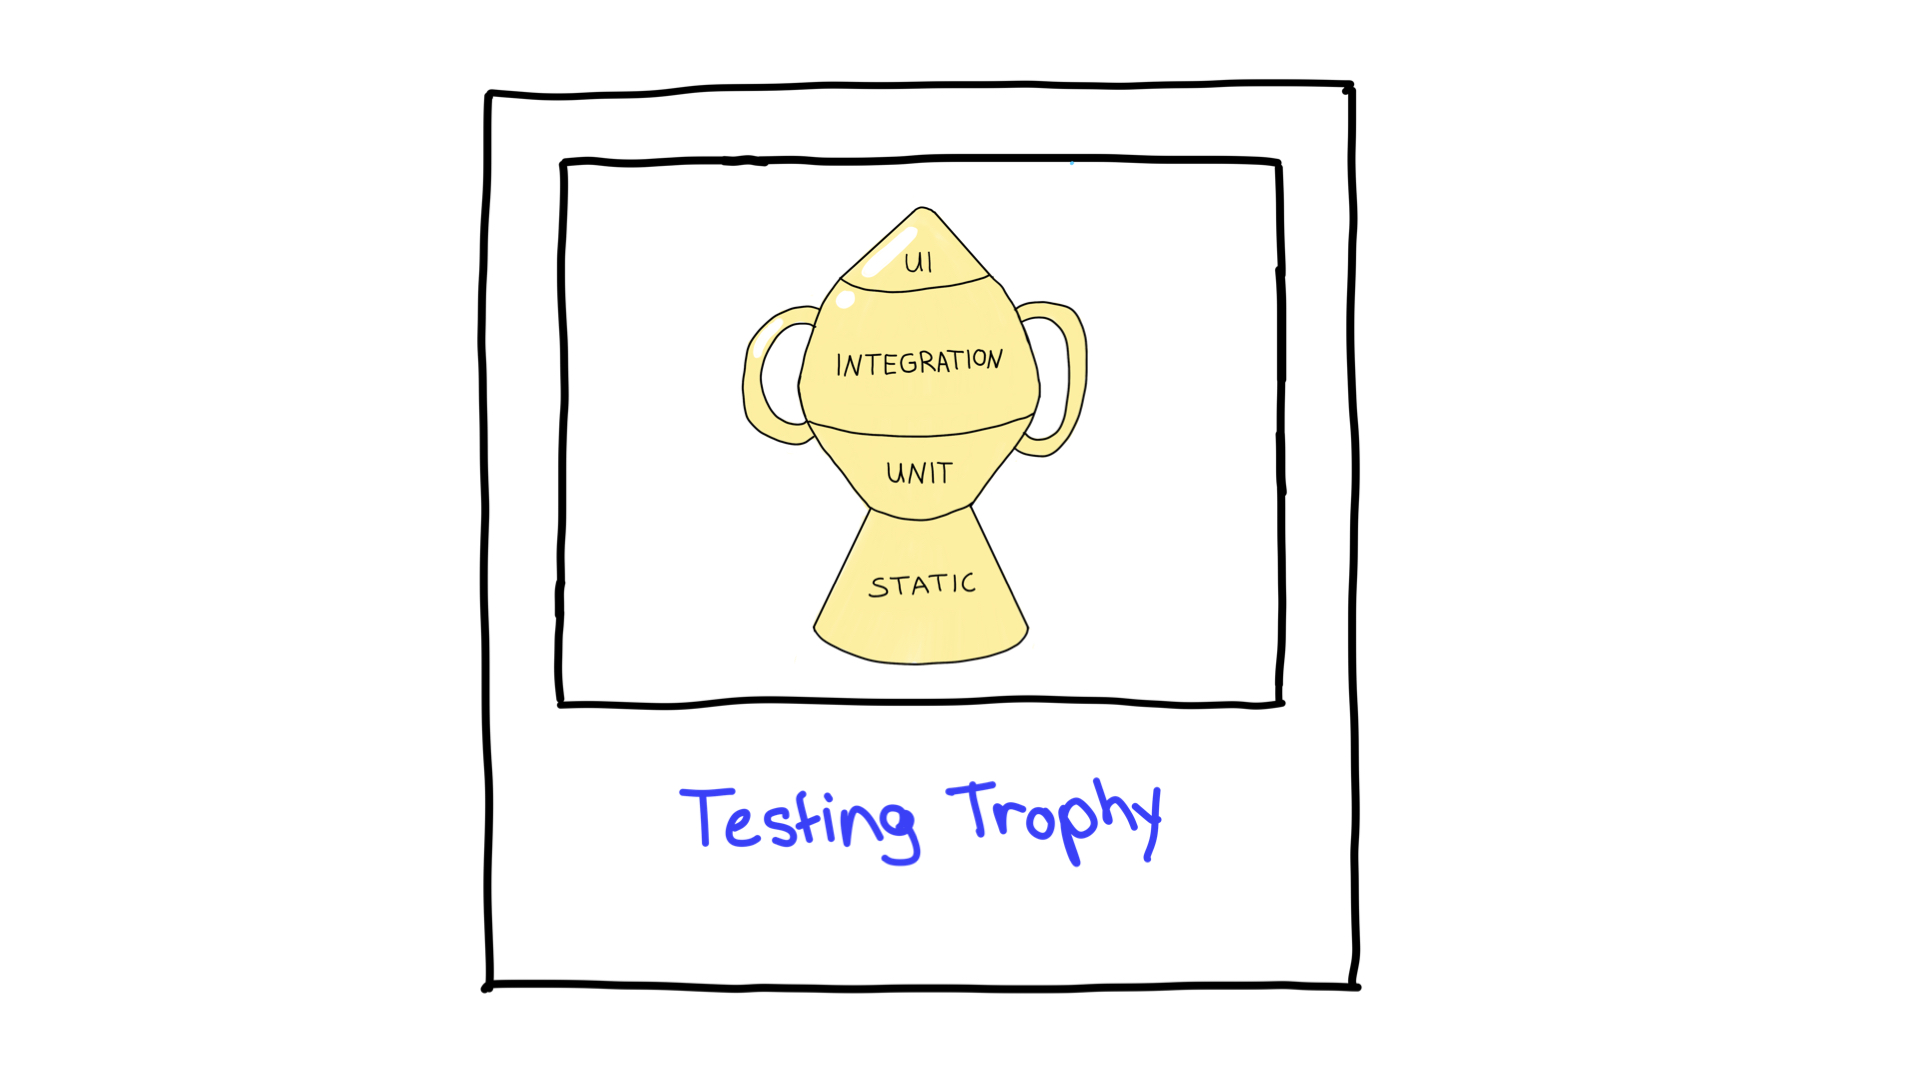 The testing trophy.